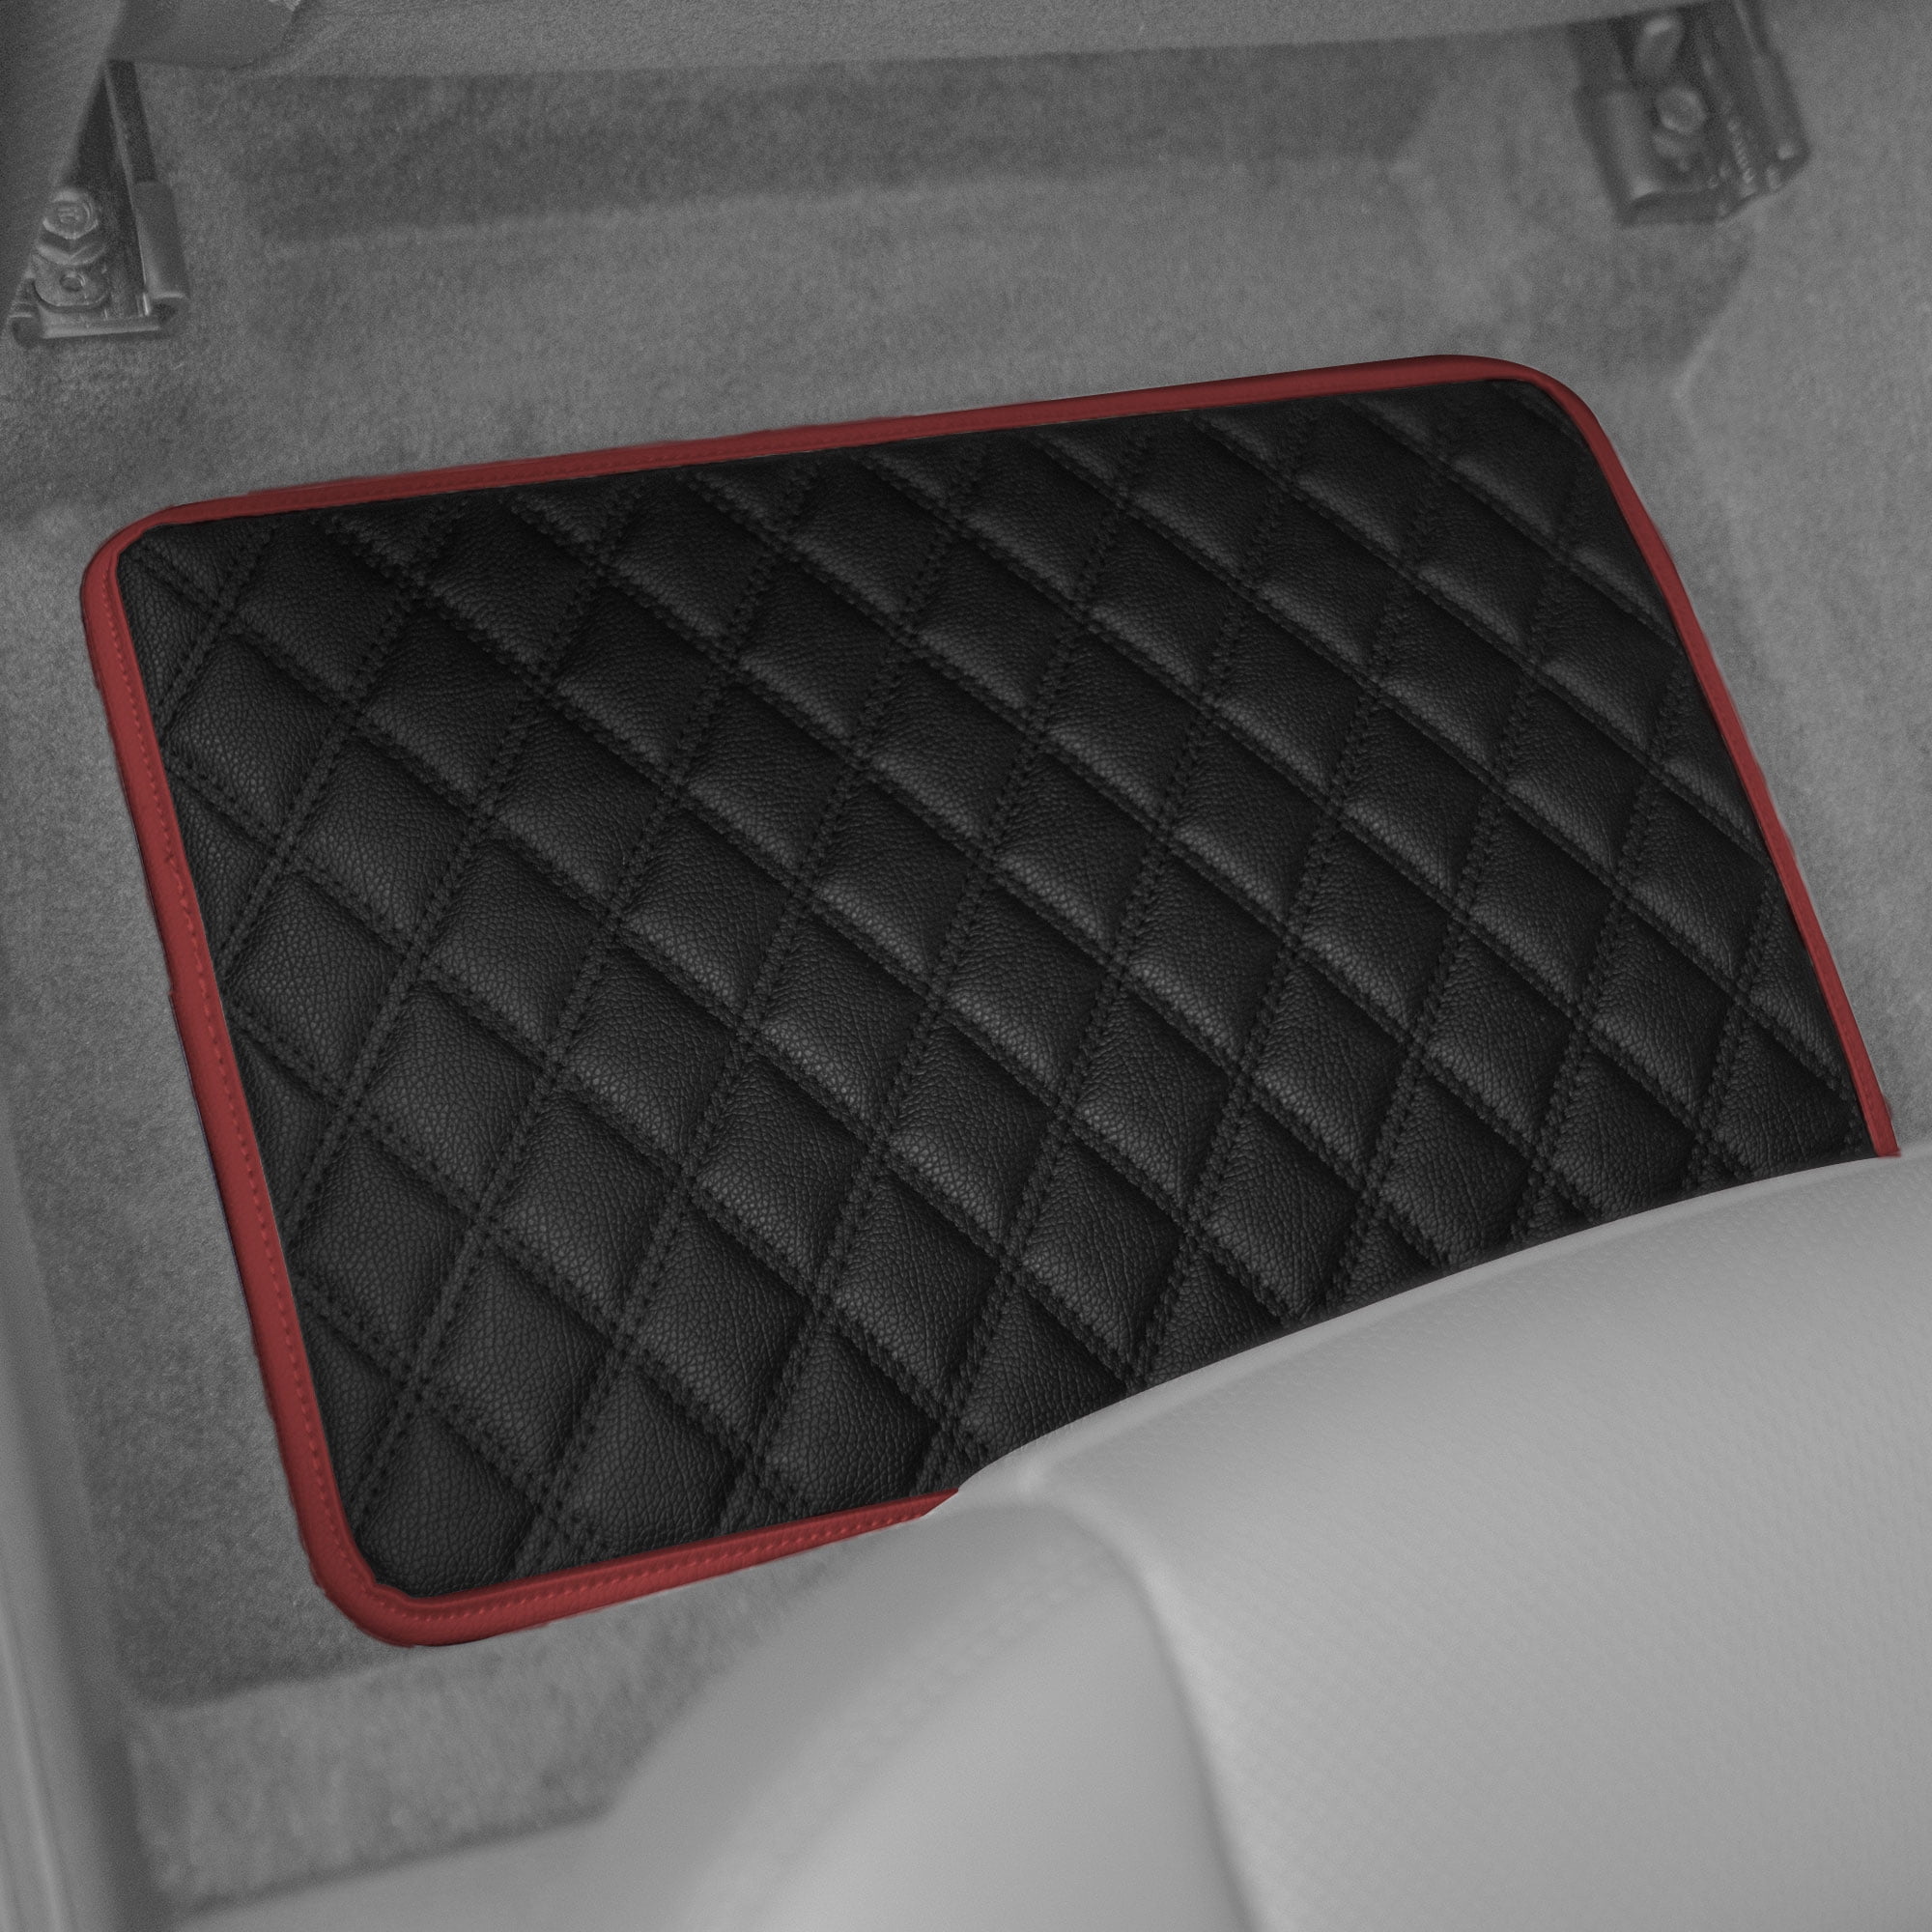 FH Group Burgundy Heavy Duty Liners Trimmable Touchdown Floor Mats -  Universal Fit for Cars, SUVs, Vans and Trucks - Full Set DMF11511BRGNDY -  The Home Depot